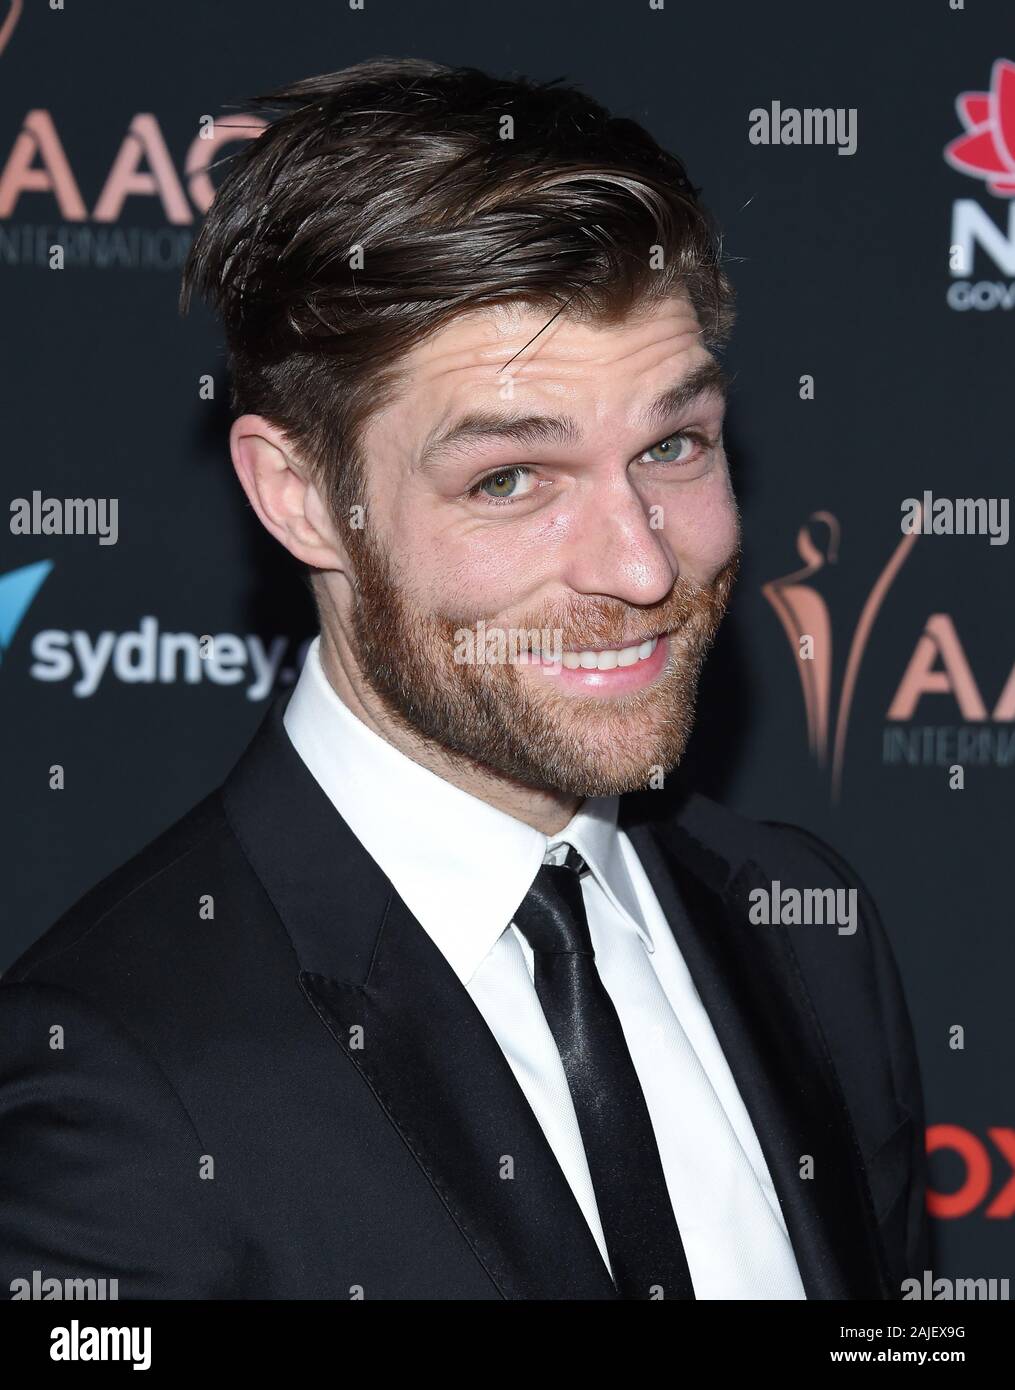 January 3, 2020, West Hollywood, California, USA: Liam McIntyre arrives for the 9th AACTA International Awards at SKYBAR at The Mondrian. (Credit Image: © Lisa O'Connor/ZUMA Wire) Stock Photo